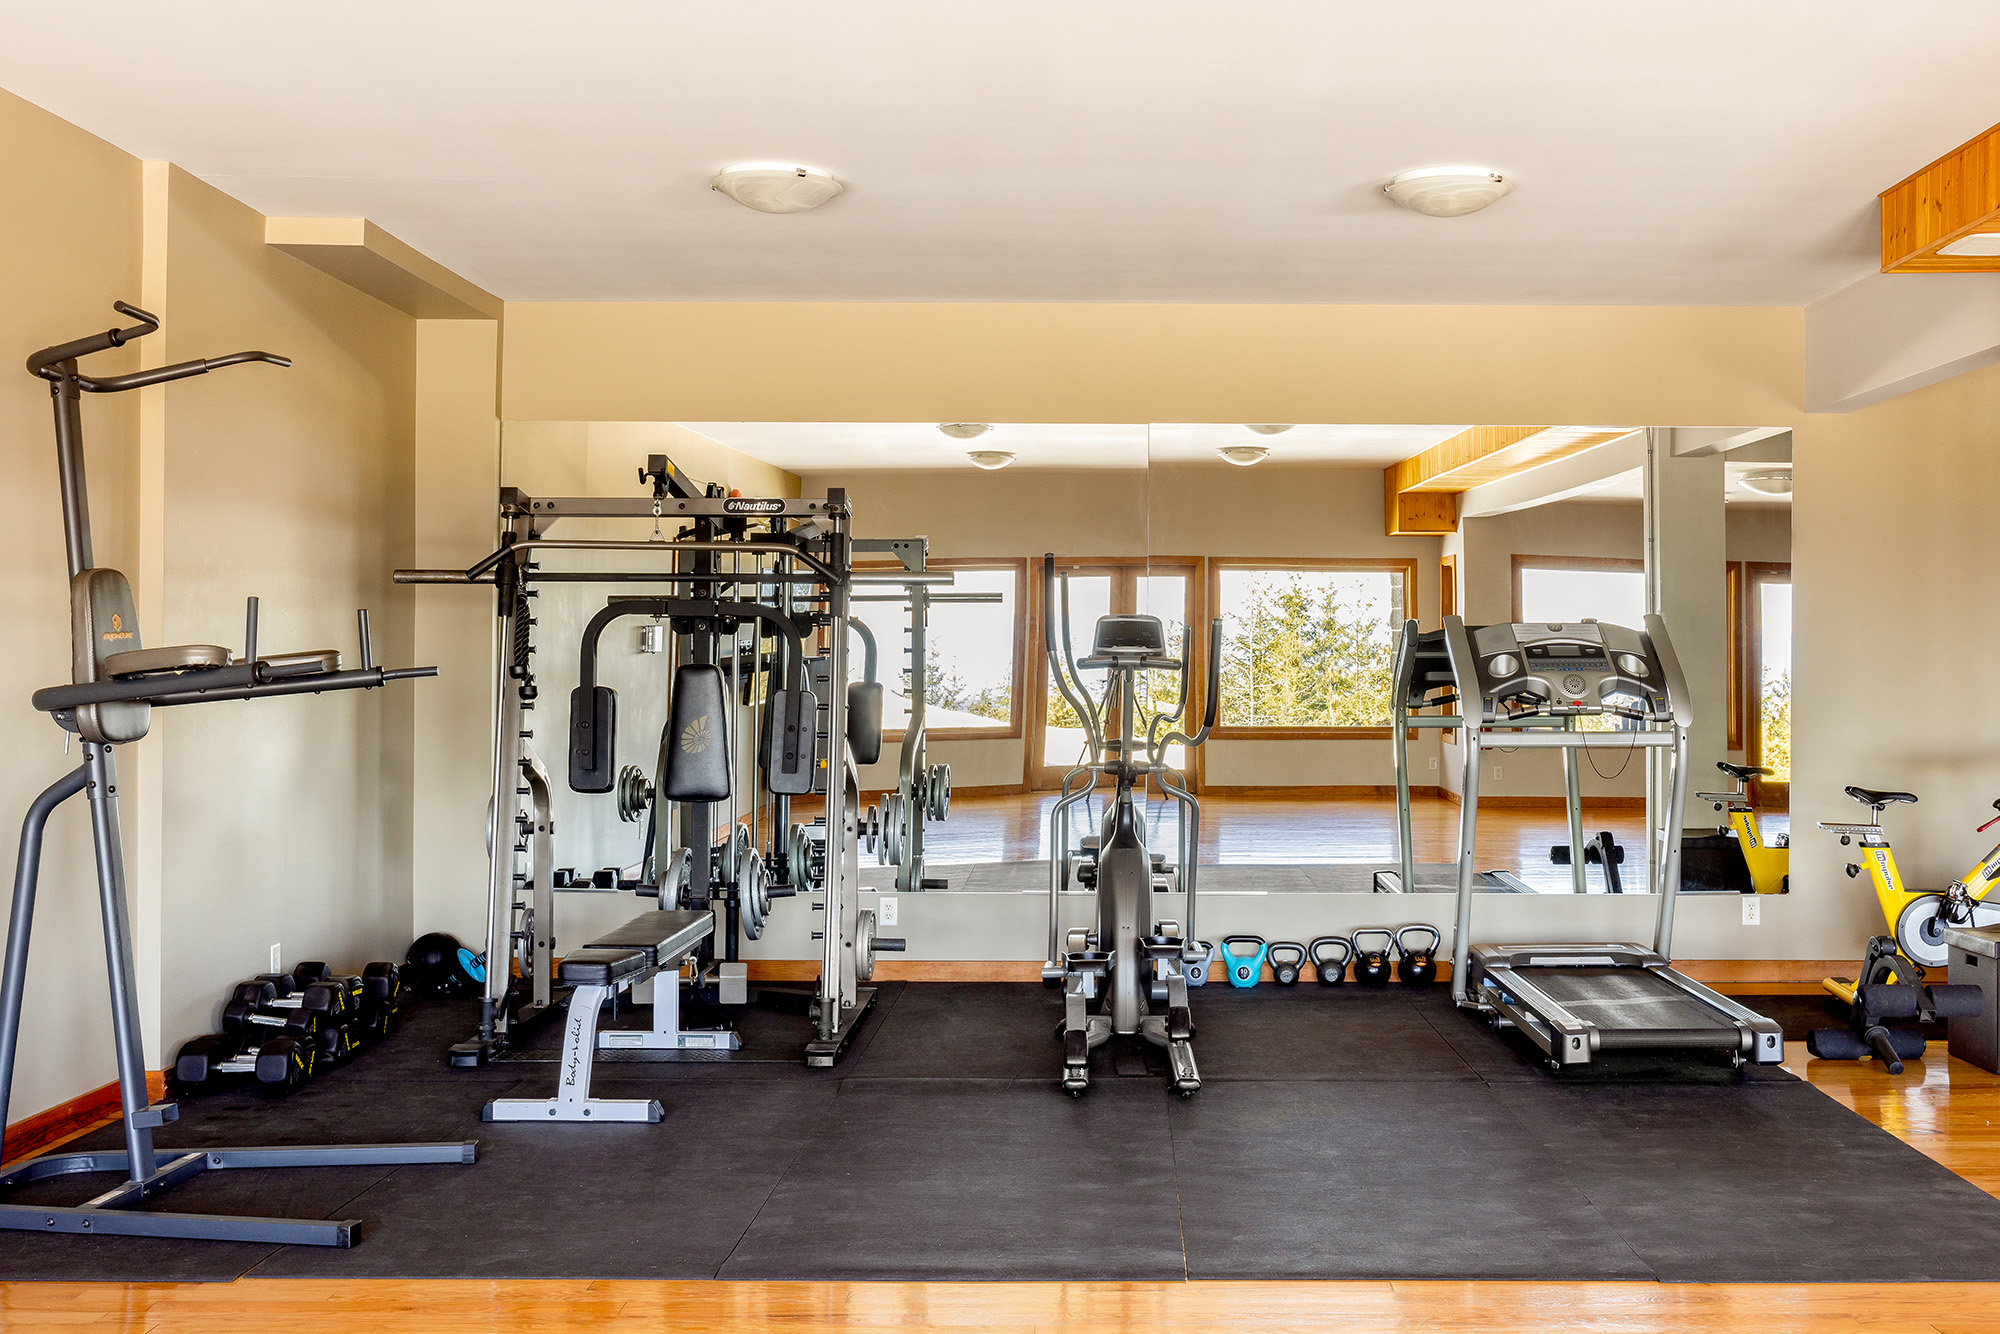 The gym at the Healing Institute